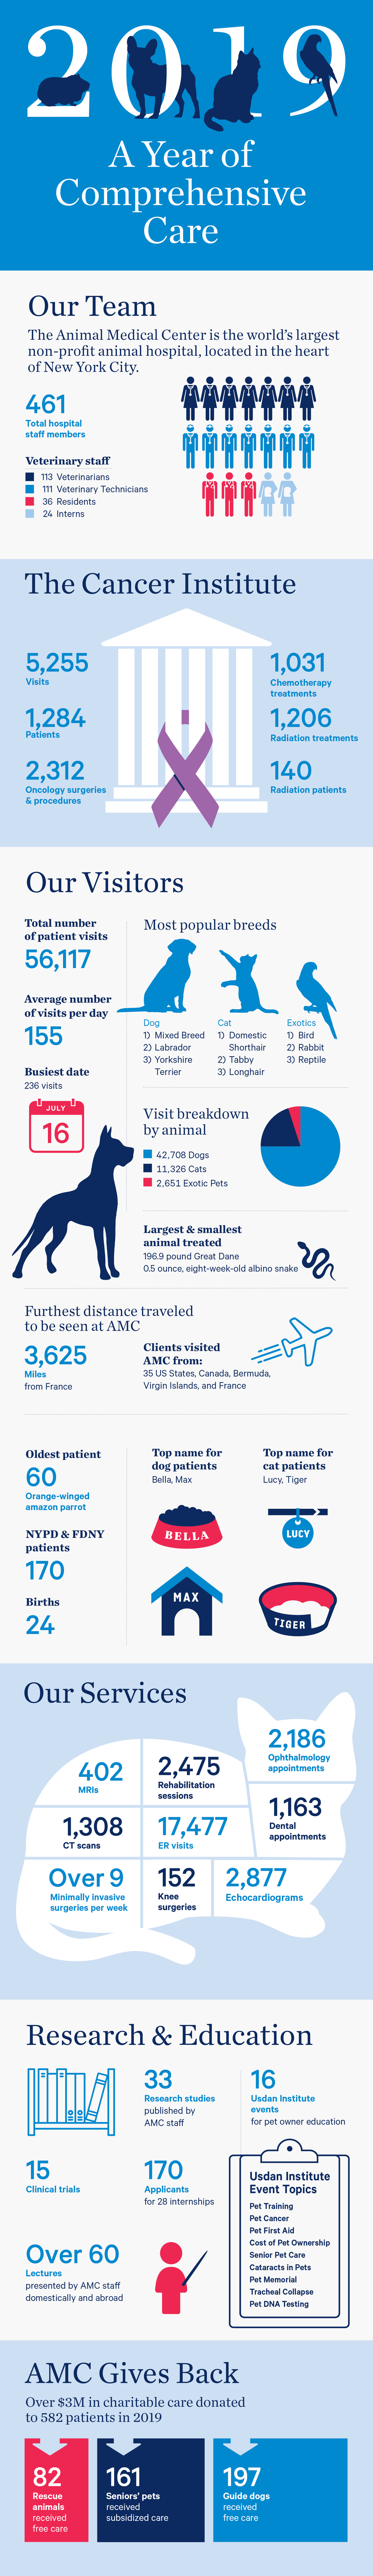 The Animal Medical Center's 2019 Year of Comprehensive Care Report